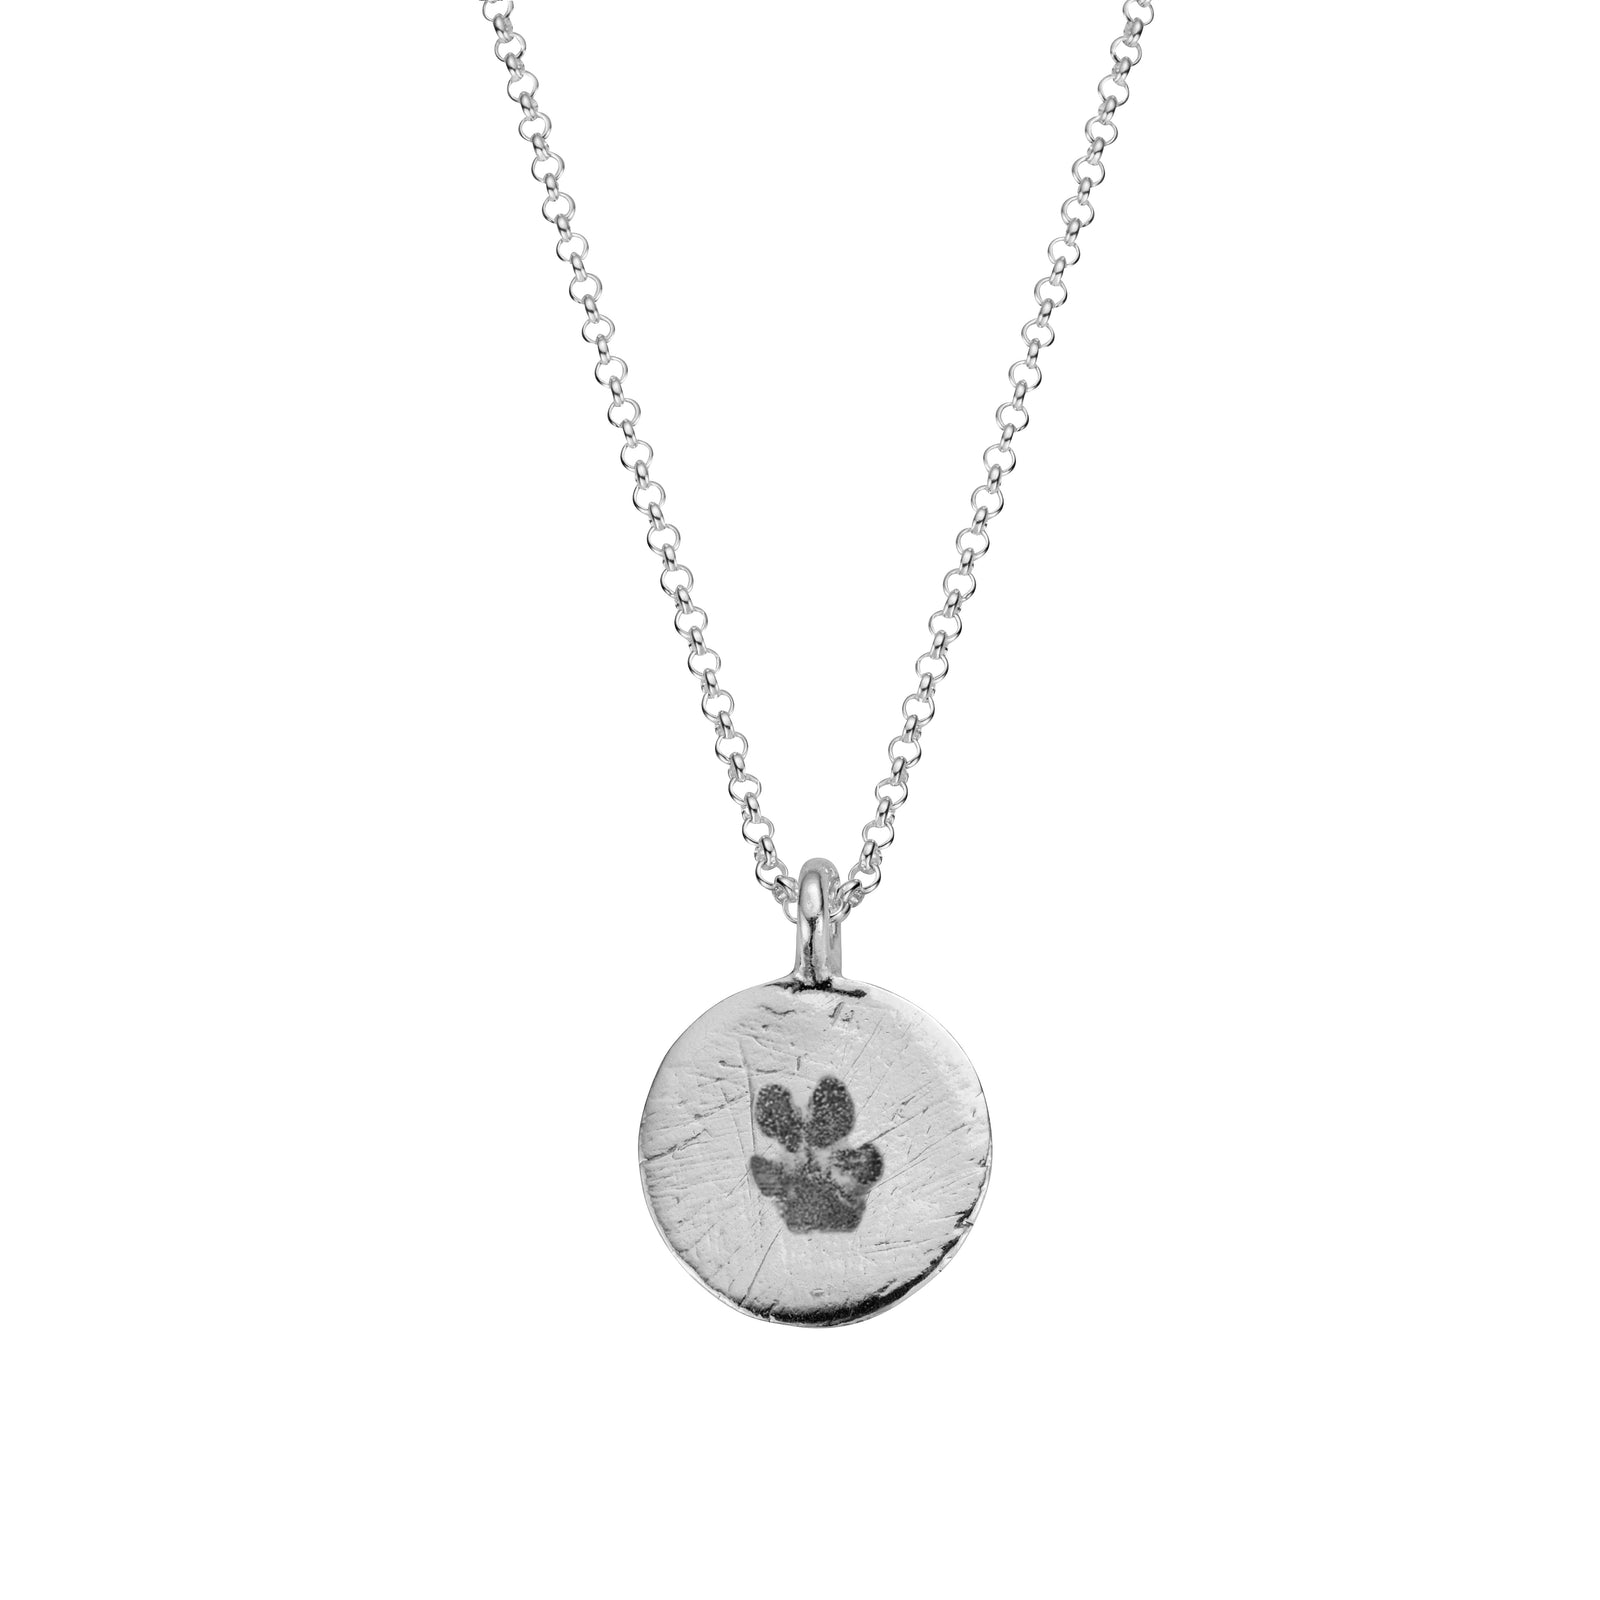 Silver Large Moon Necklace with Paw Print